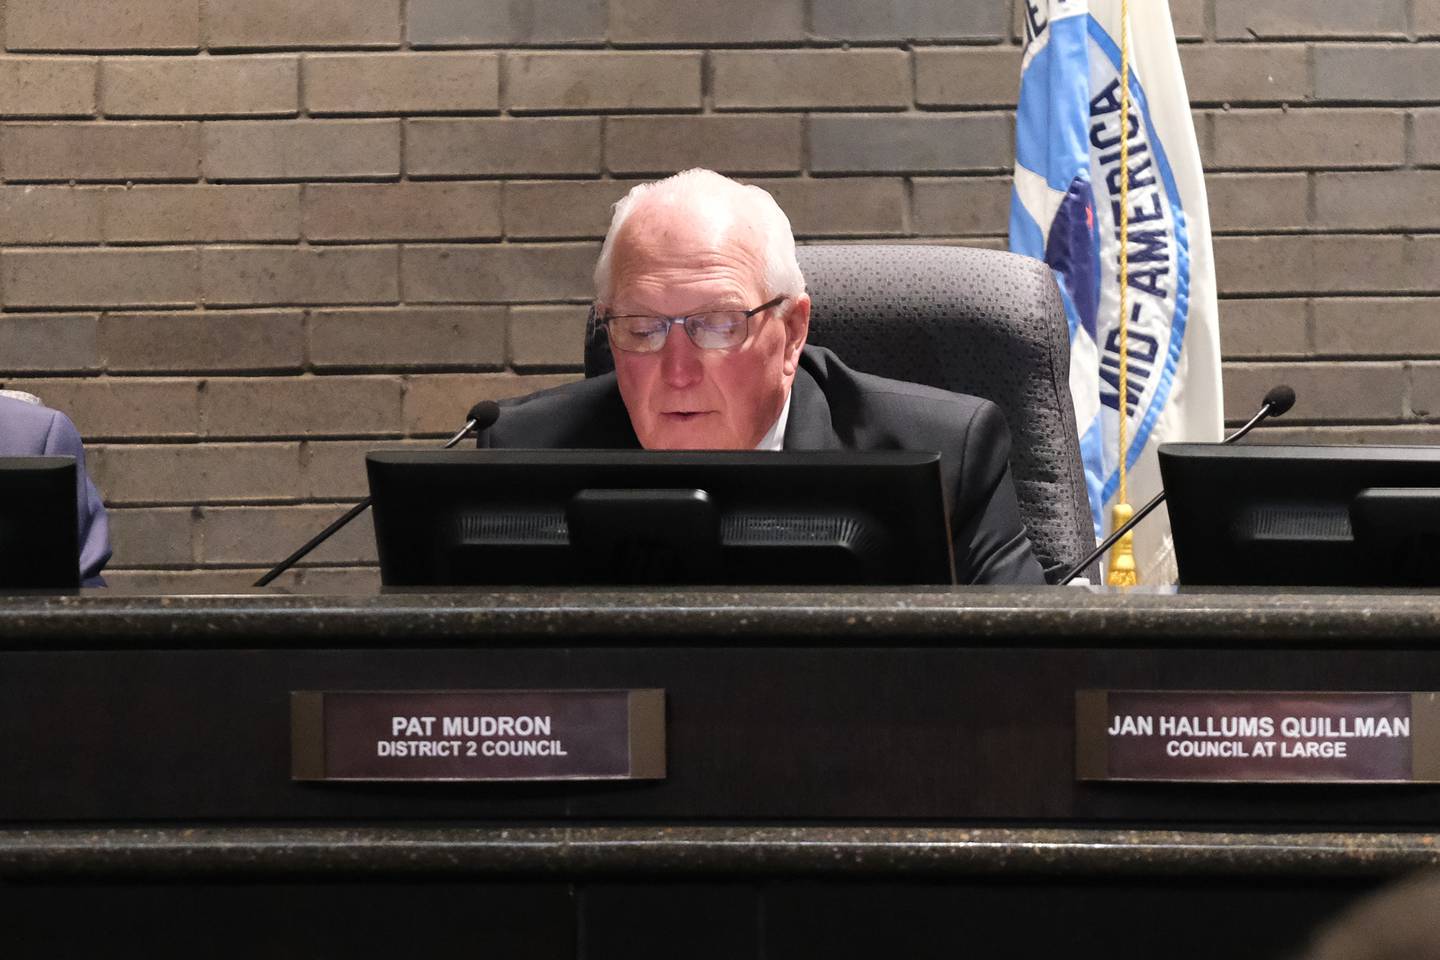 District 2 Council Pat Mudron during the Joliet City Council meeting on Tuesday at Joliet City Hall. Tuesday, Dec. 21, 2021 in Joliet.